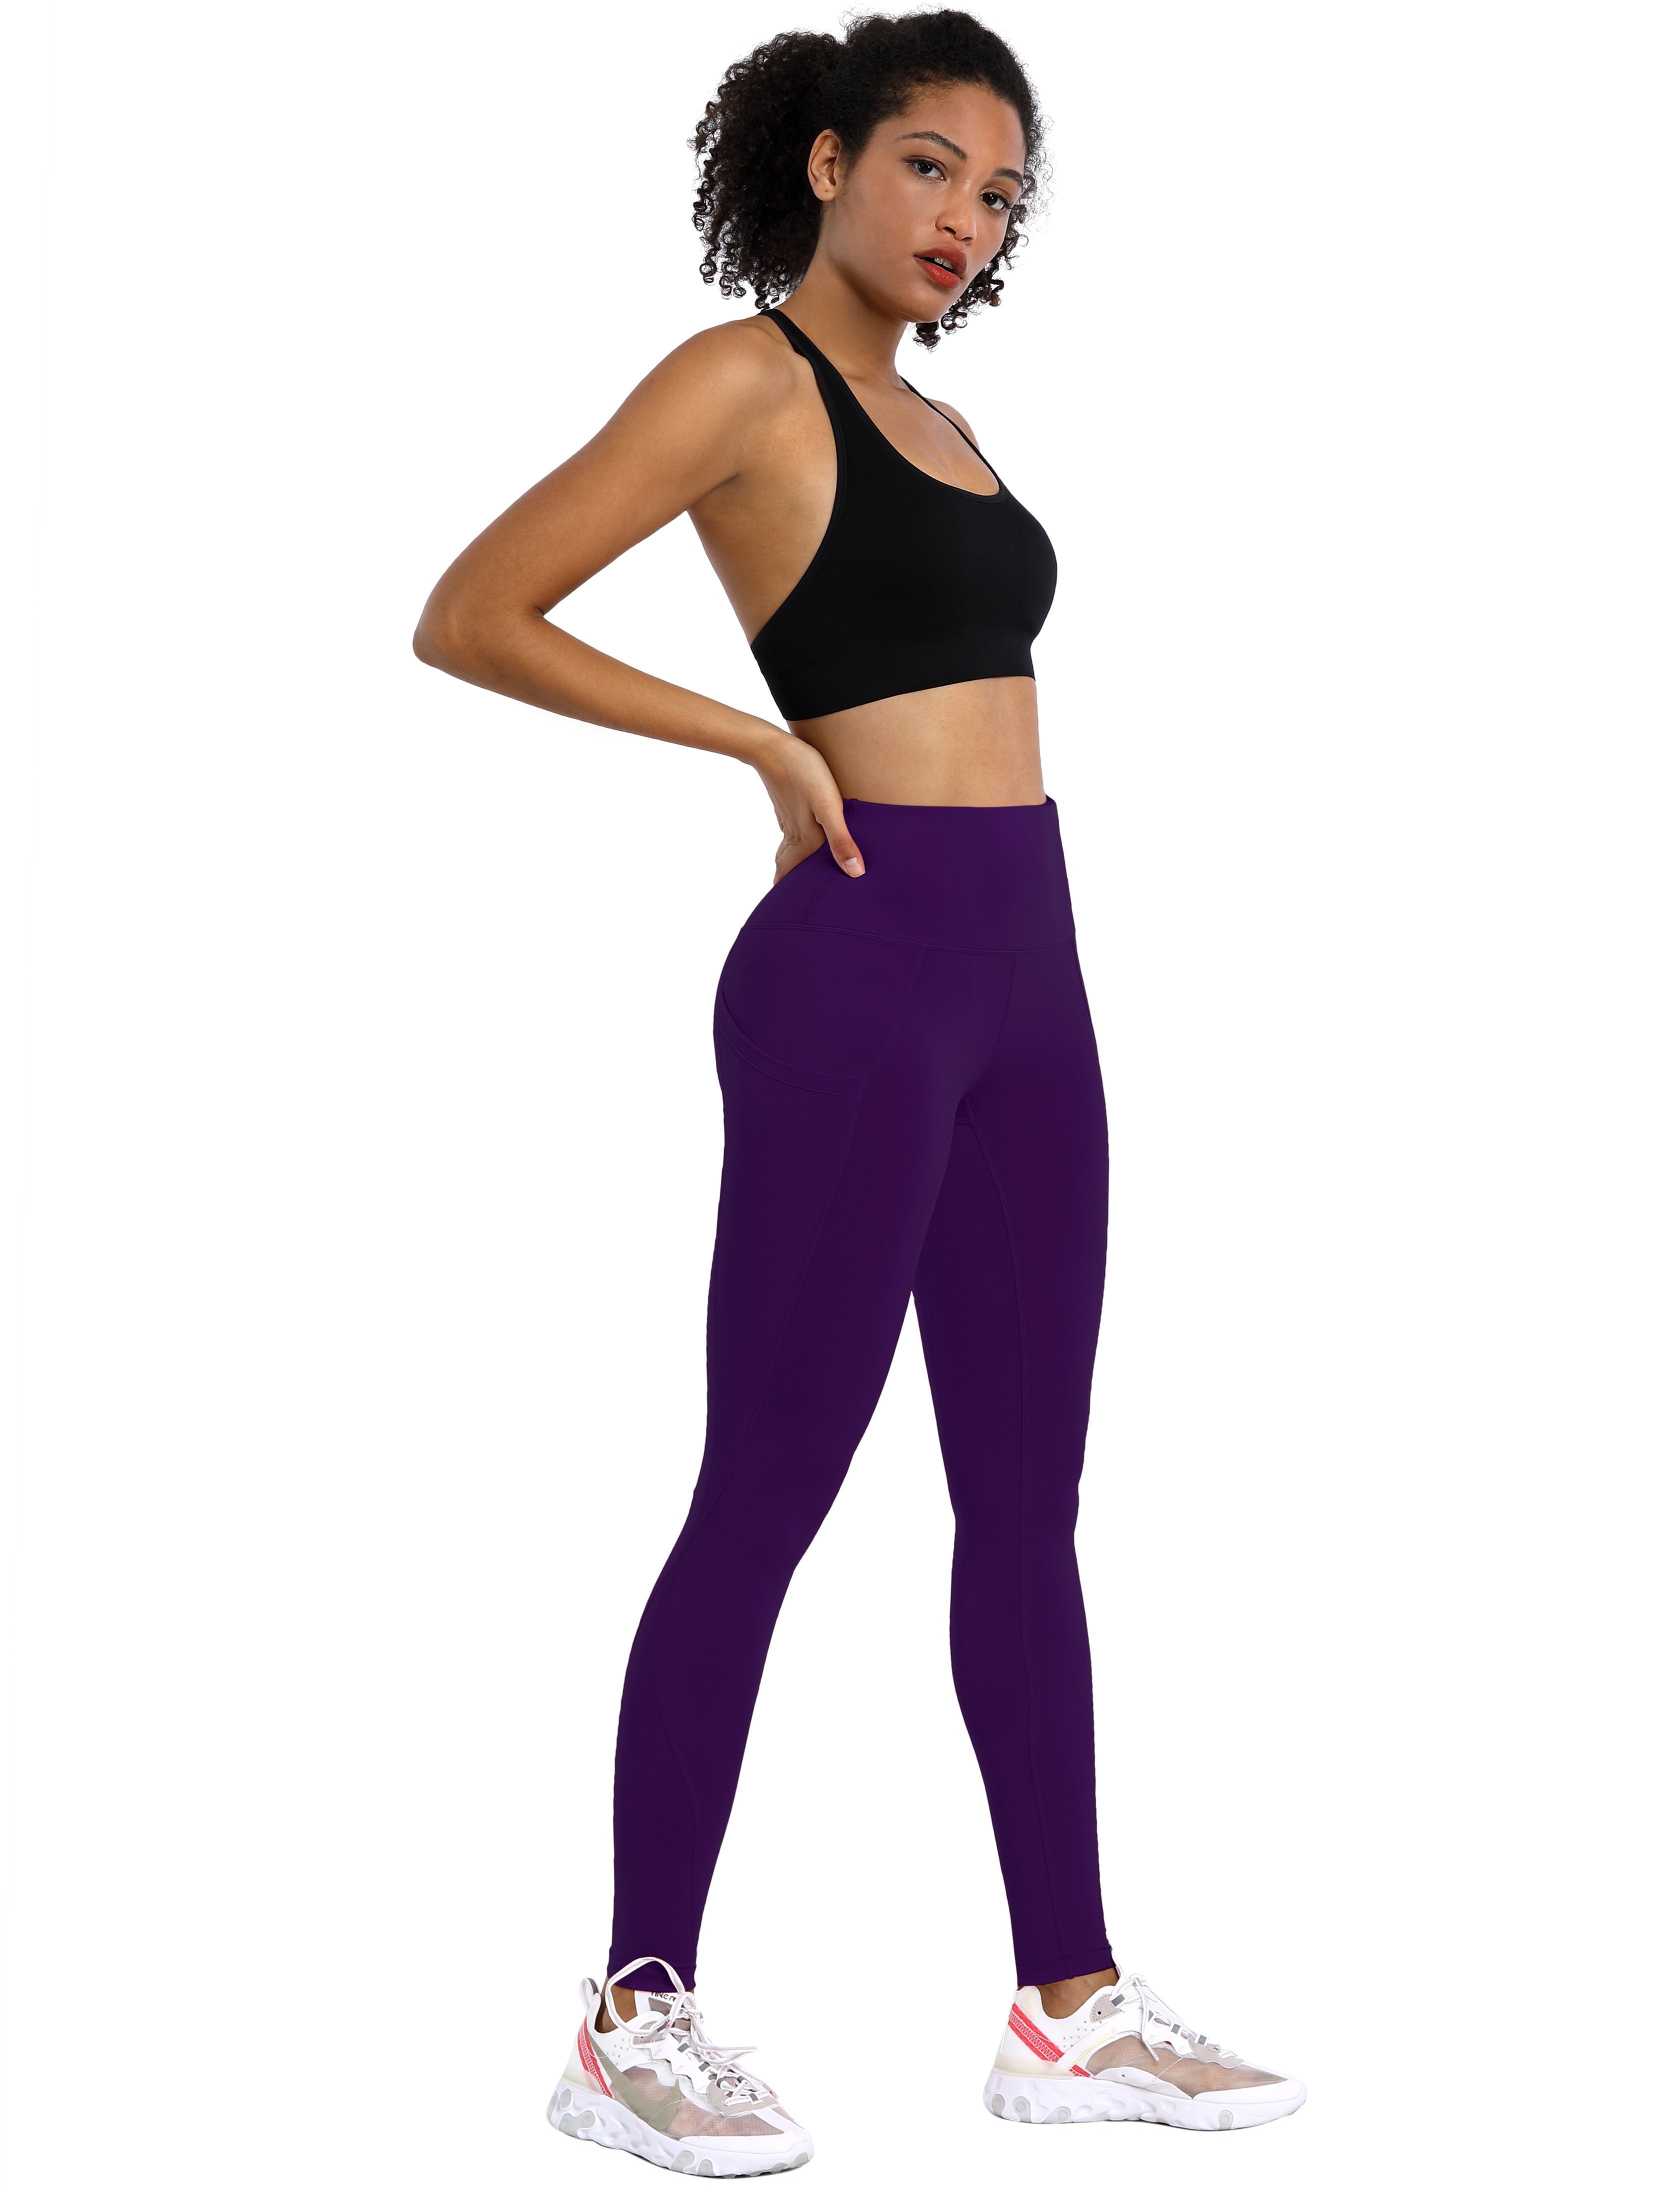 High Waist Side Pockets Jogging Pants pansypurple 75% Nylon, 25% Spandex Fabric doesn't attract lint easily 4-way stretch No see-through Moisture-wicking Tummy control Inner pocket